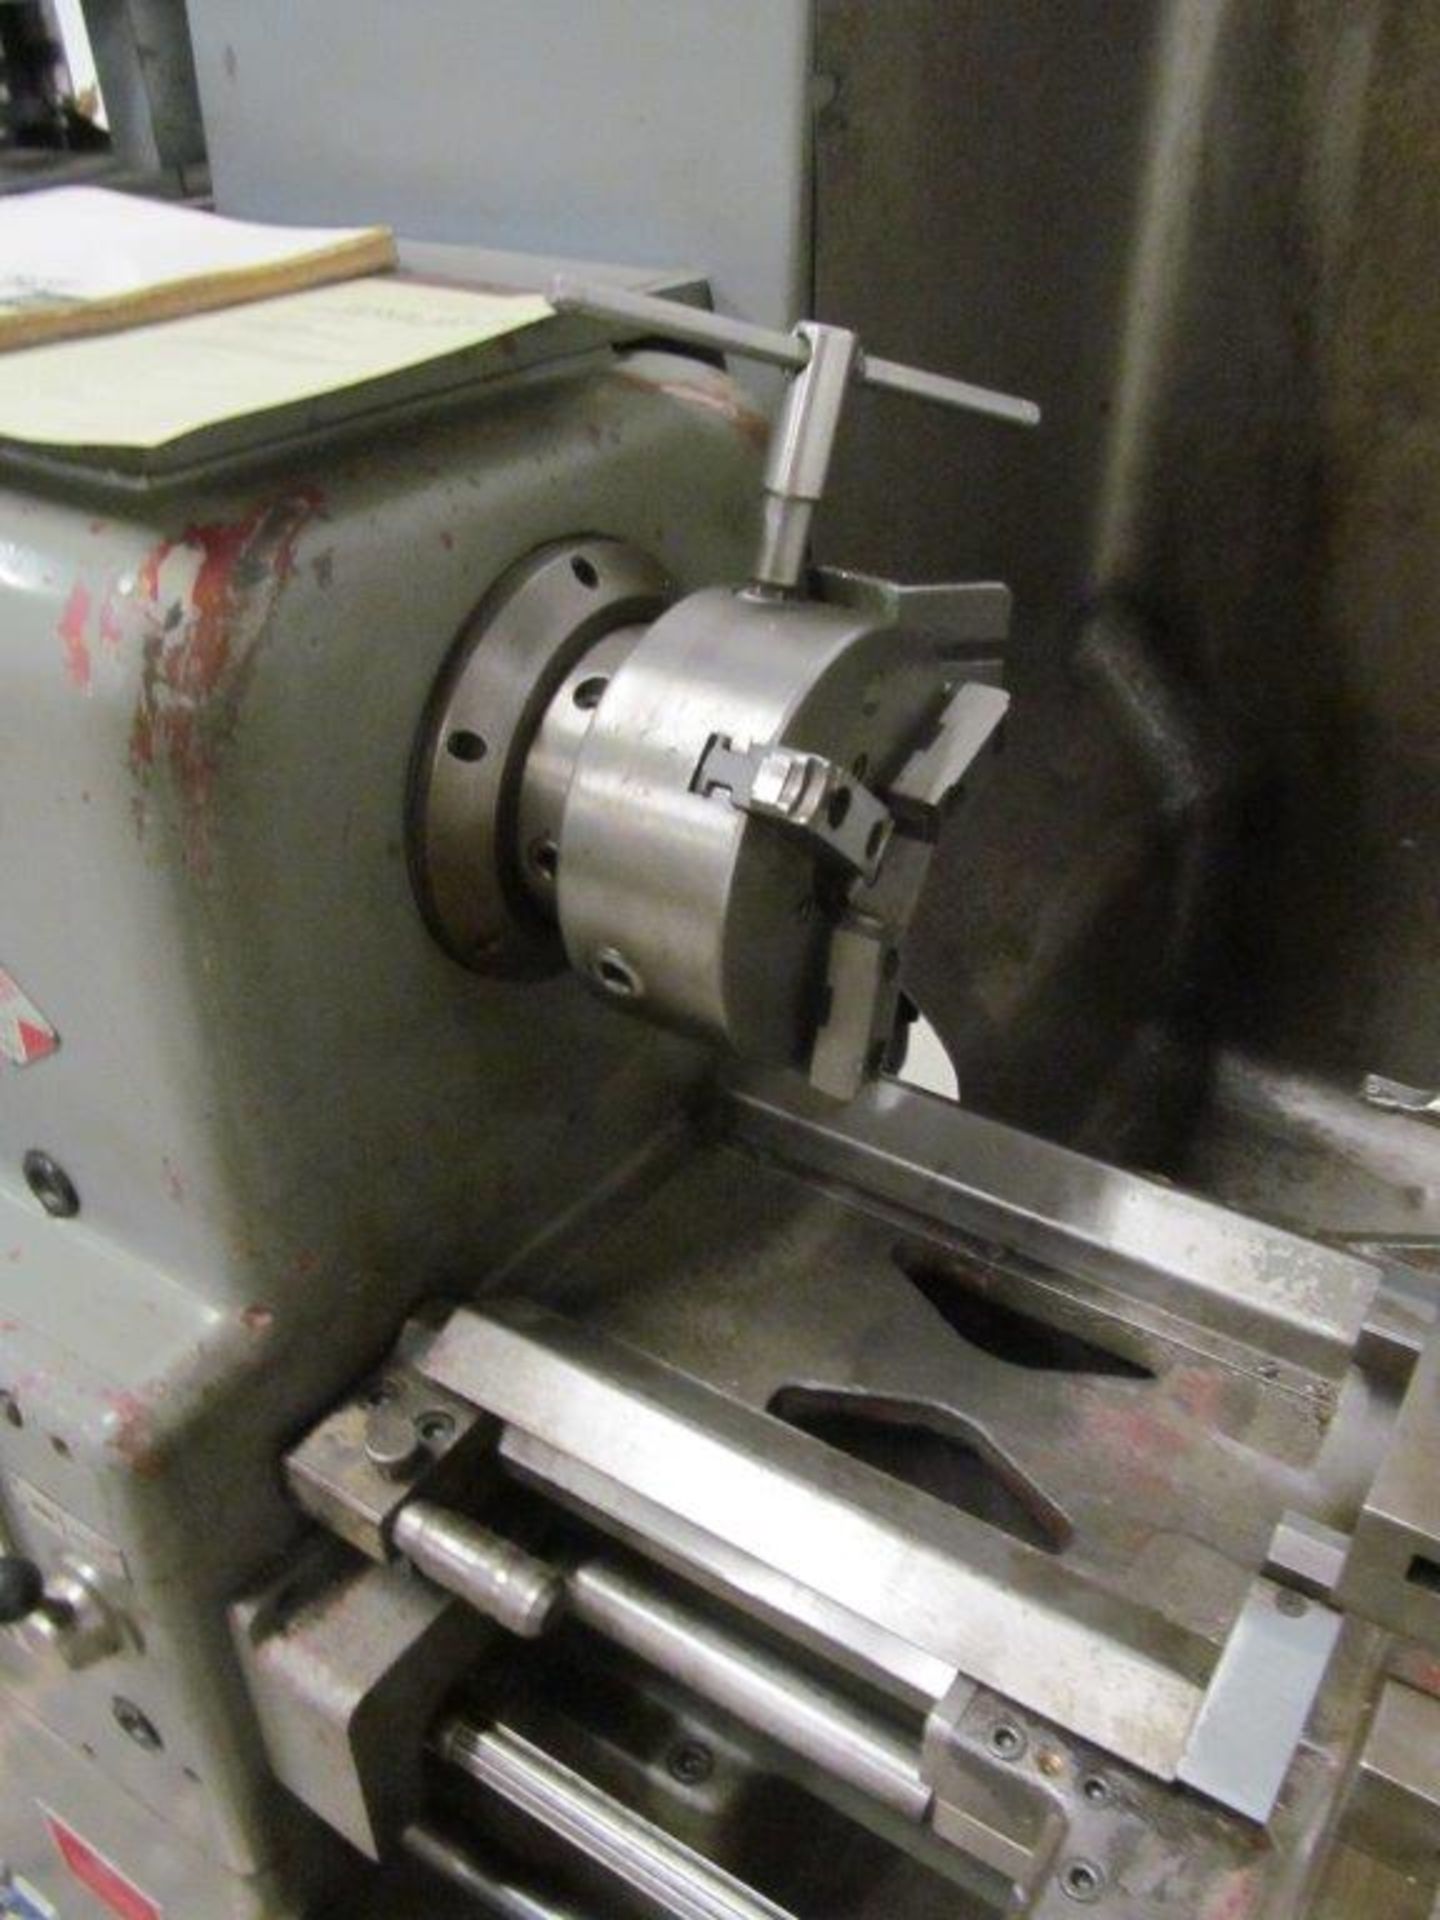 GRAZIANO ENGINE LATHE MODEL SAG 12, 14-1/2" SWING X 30" CENTERS, C/W ACCOMPANYING ACCESSORIES, - Image 5 of 8